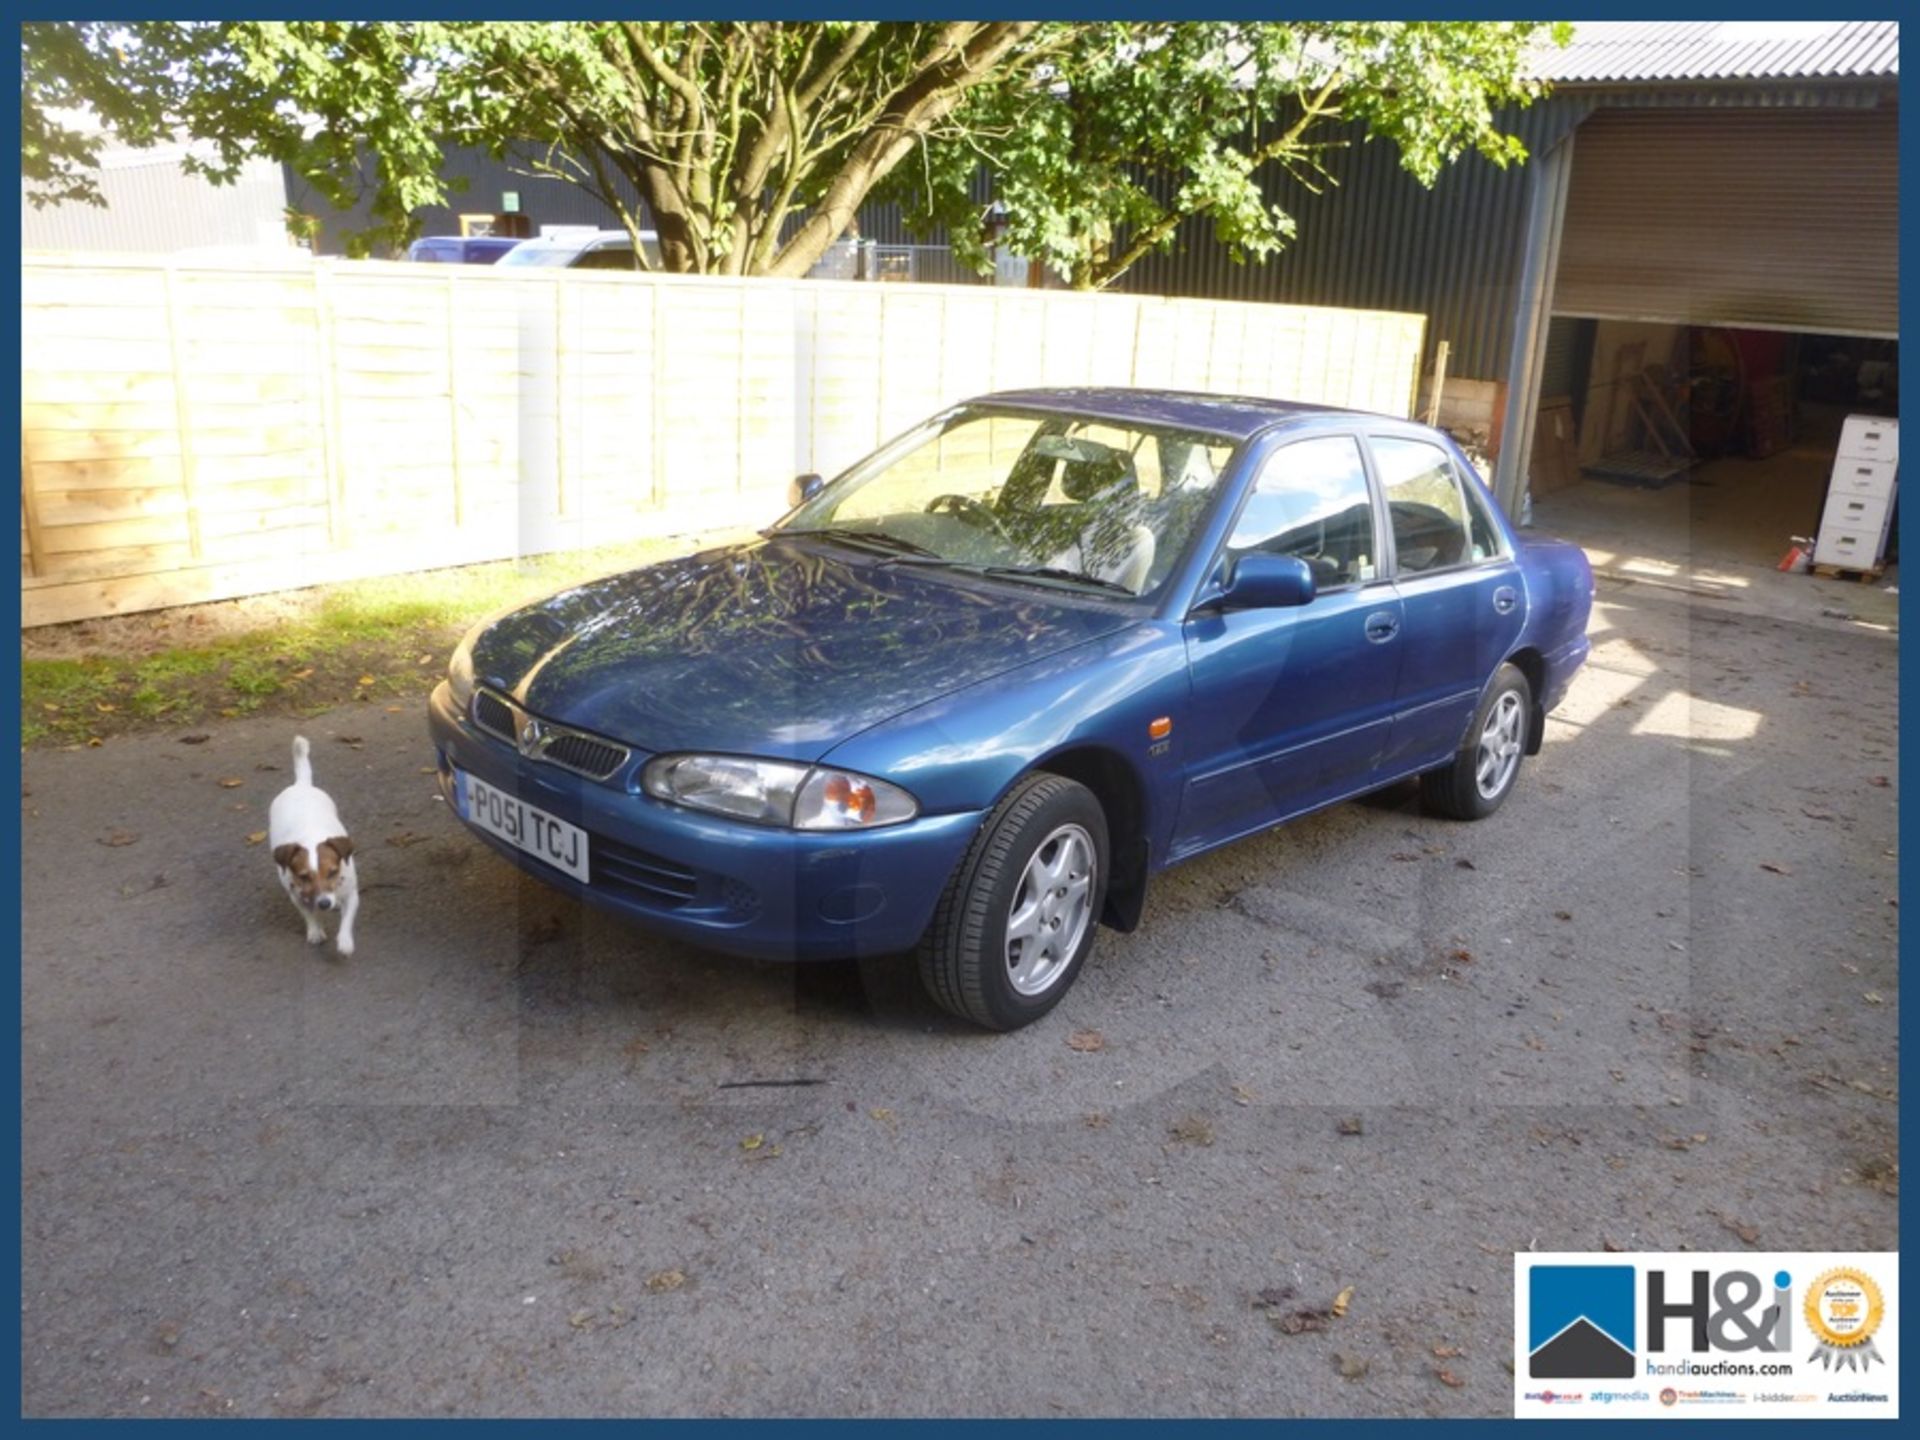 Proton Wira 1.5 petrol saloon 51 plate good runner except one brake seized on. Dog not included. - Image 14 of 14